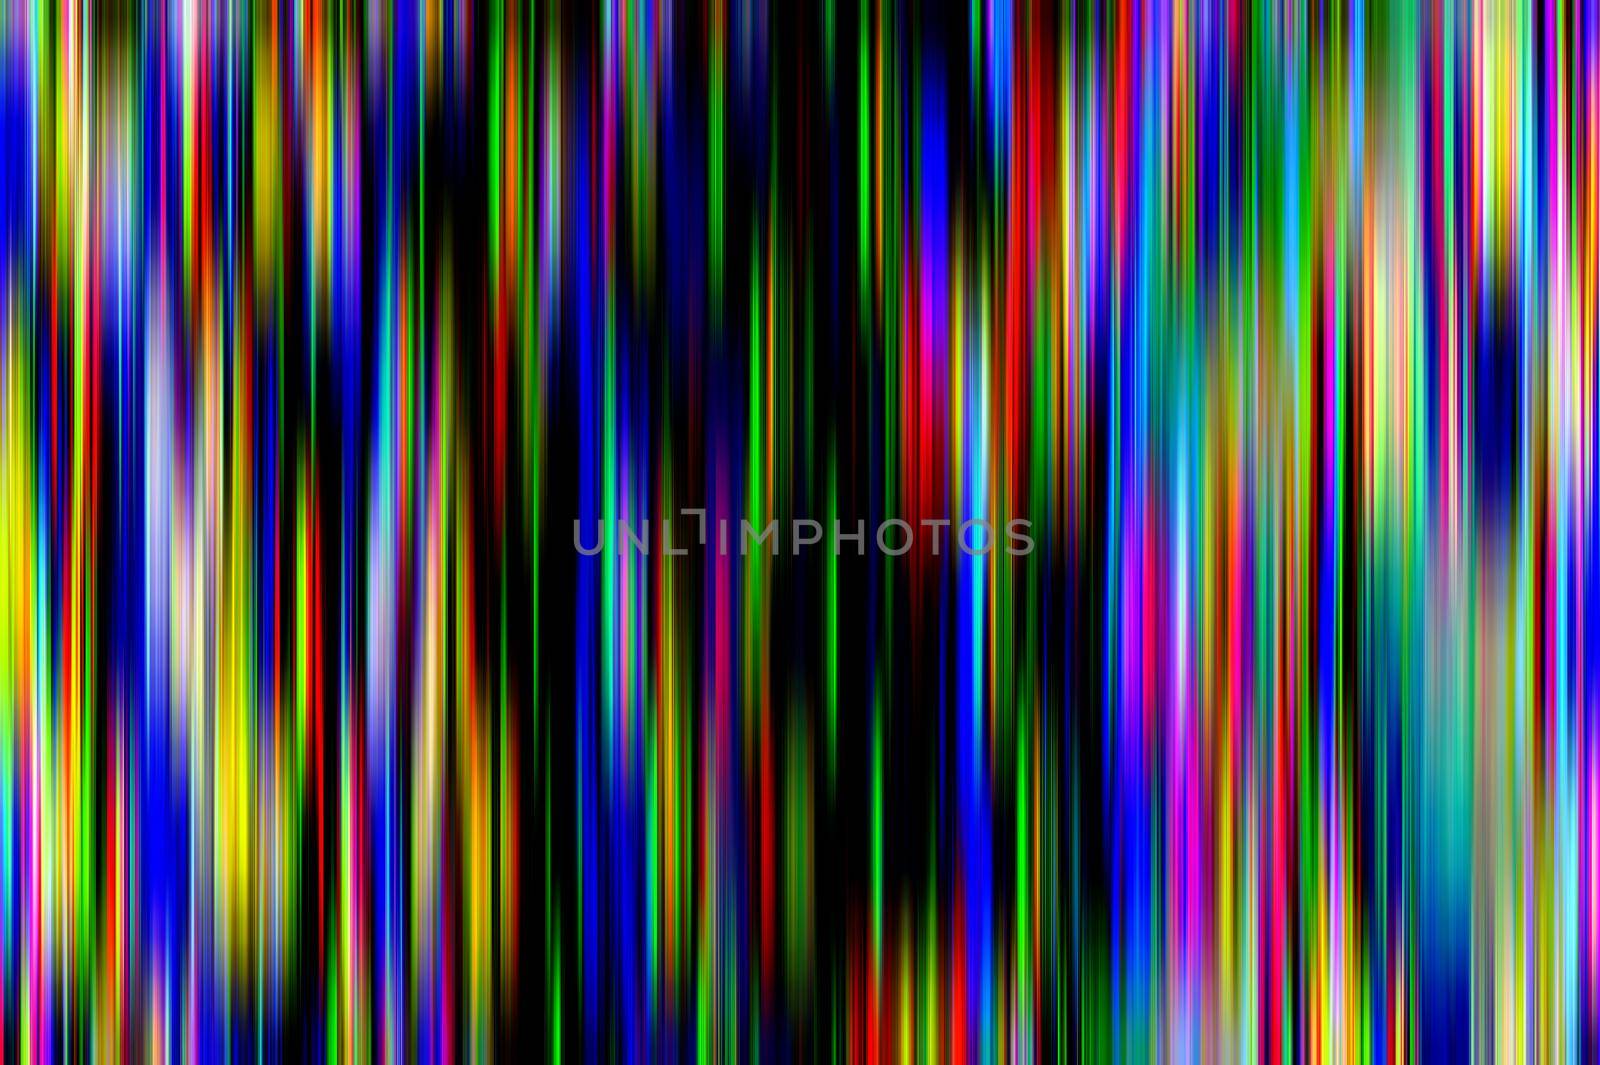 Glitch psychedelic background. Old TV screen error. Digital pixel noise abstract design. Broken pixels glitch. Television signal fail. Technical problem grunge wallpaper. Colorful noise rerto